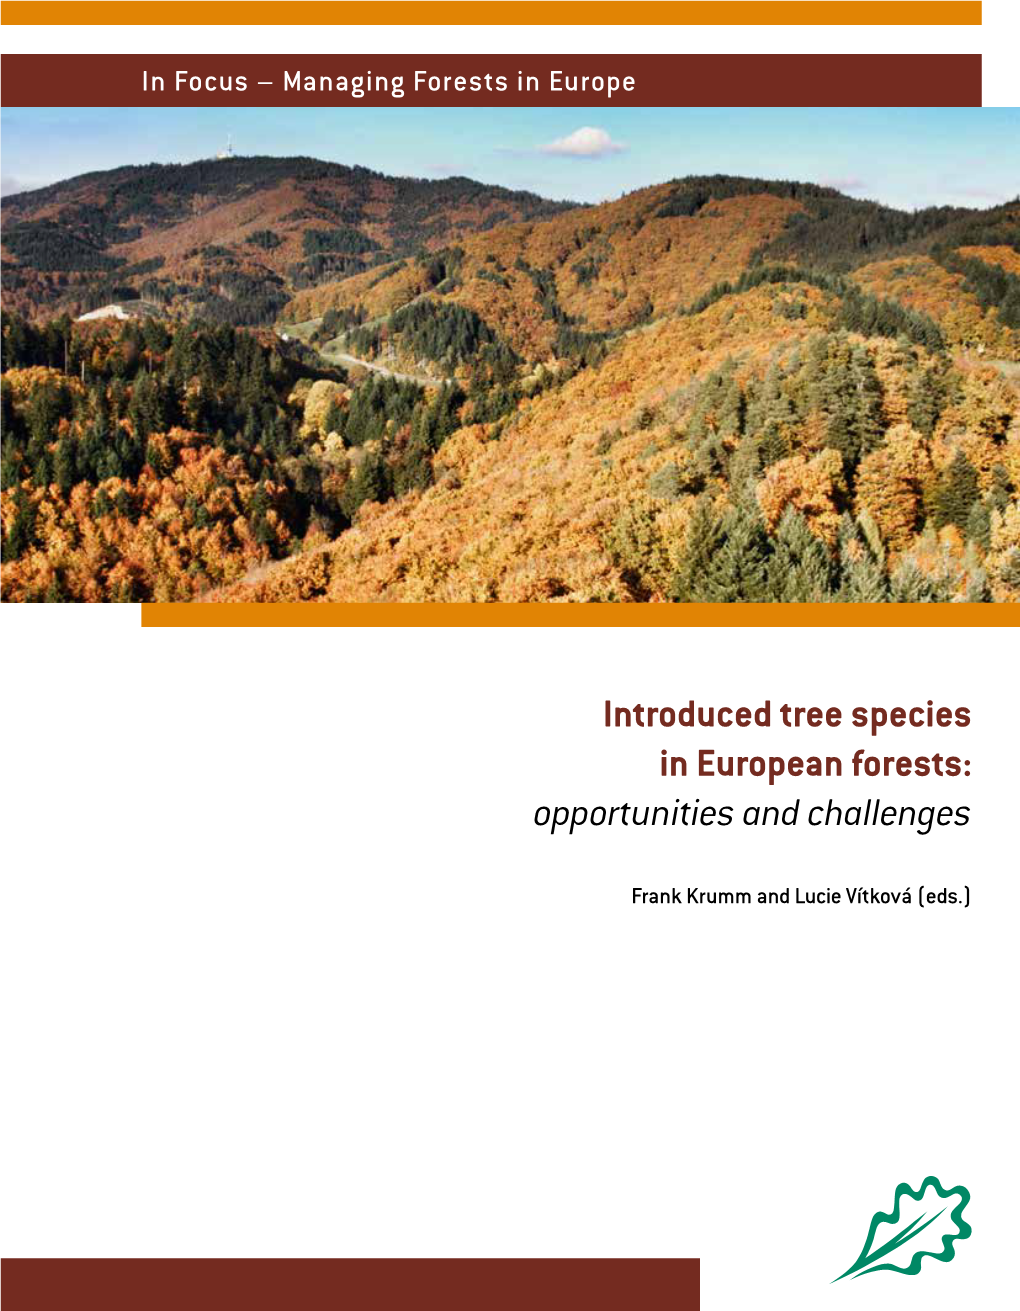 Introduced Tree Species in European Forests